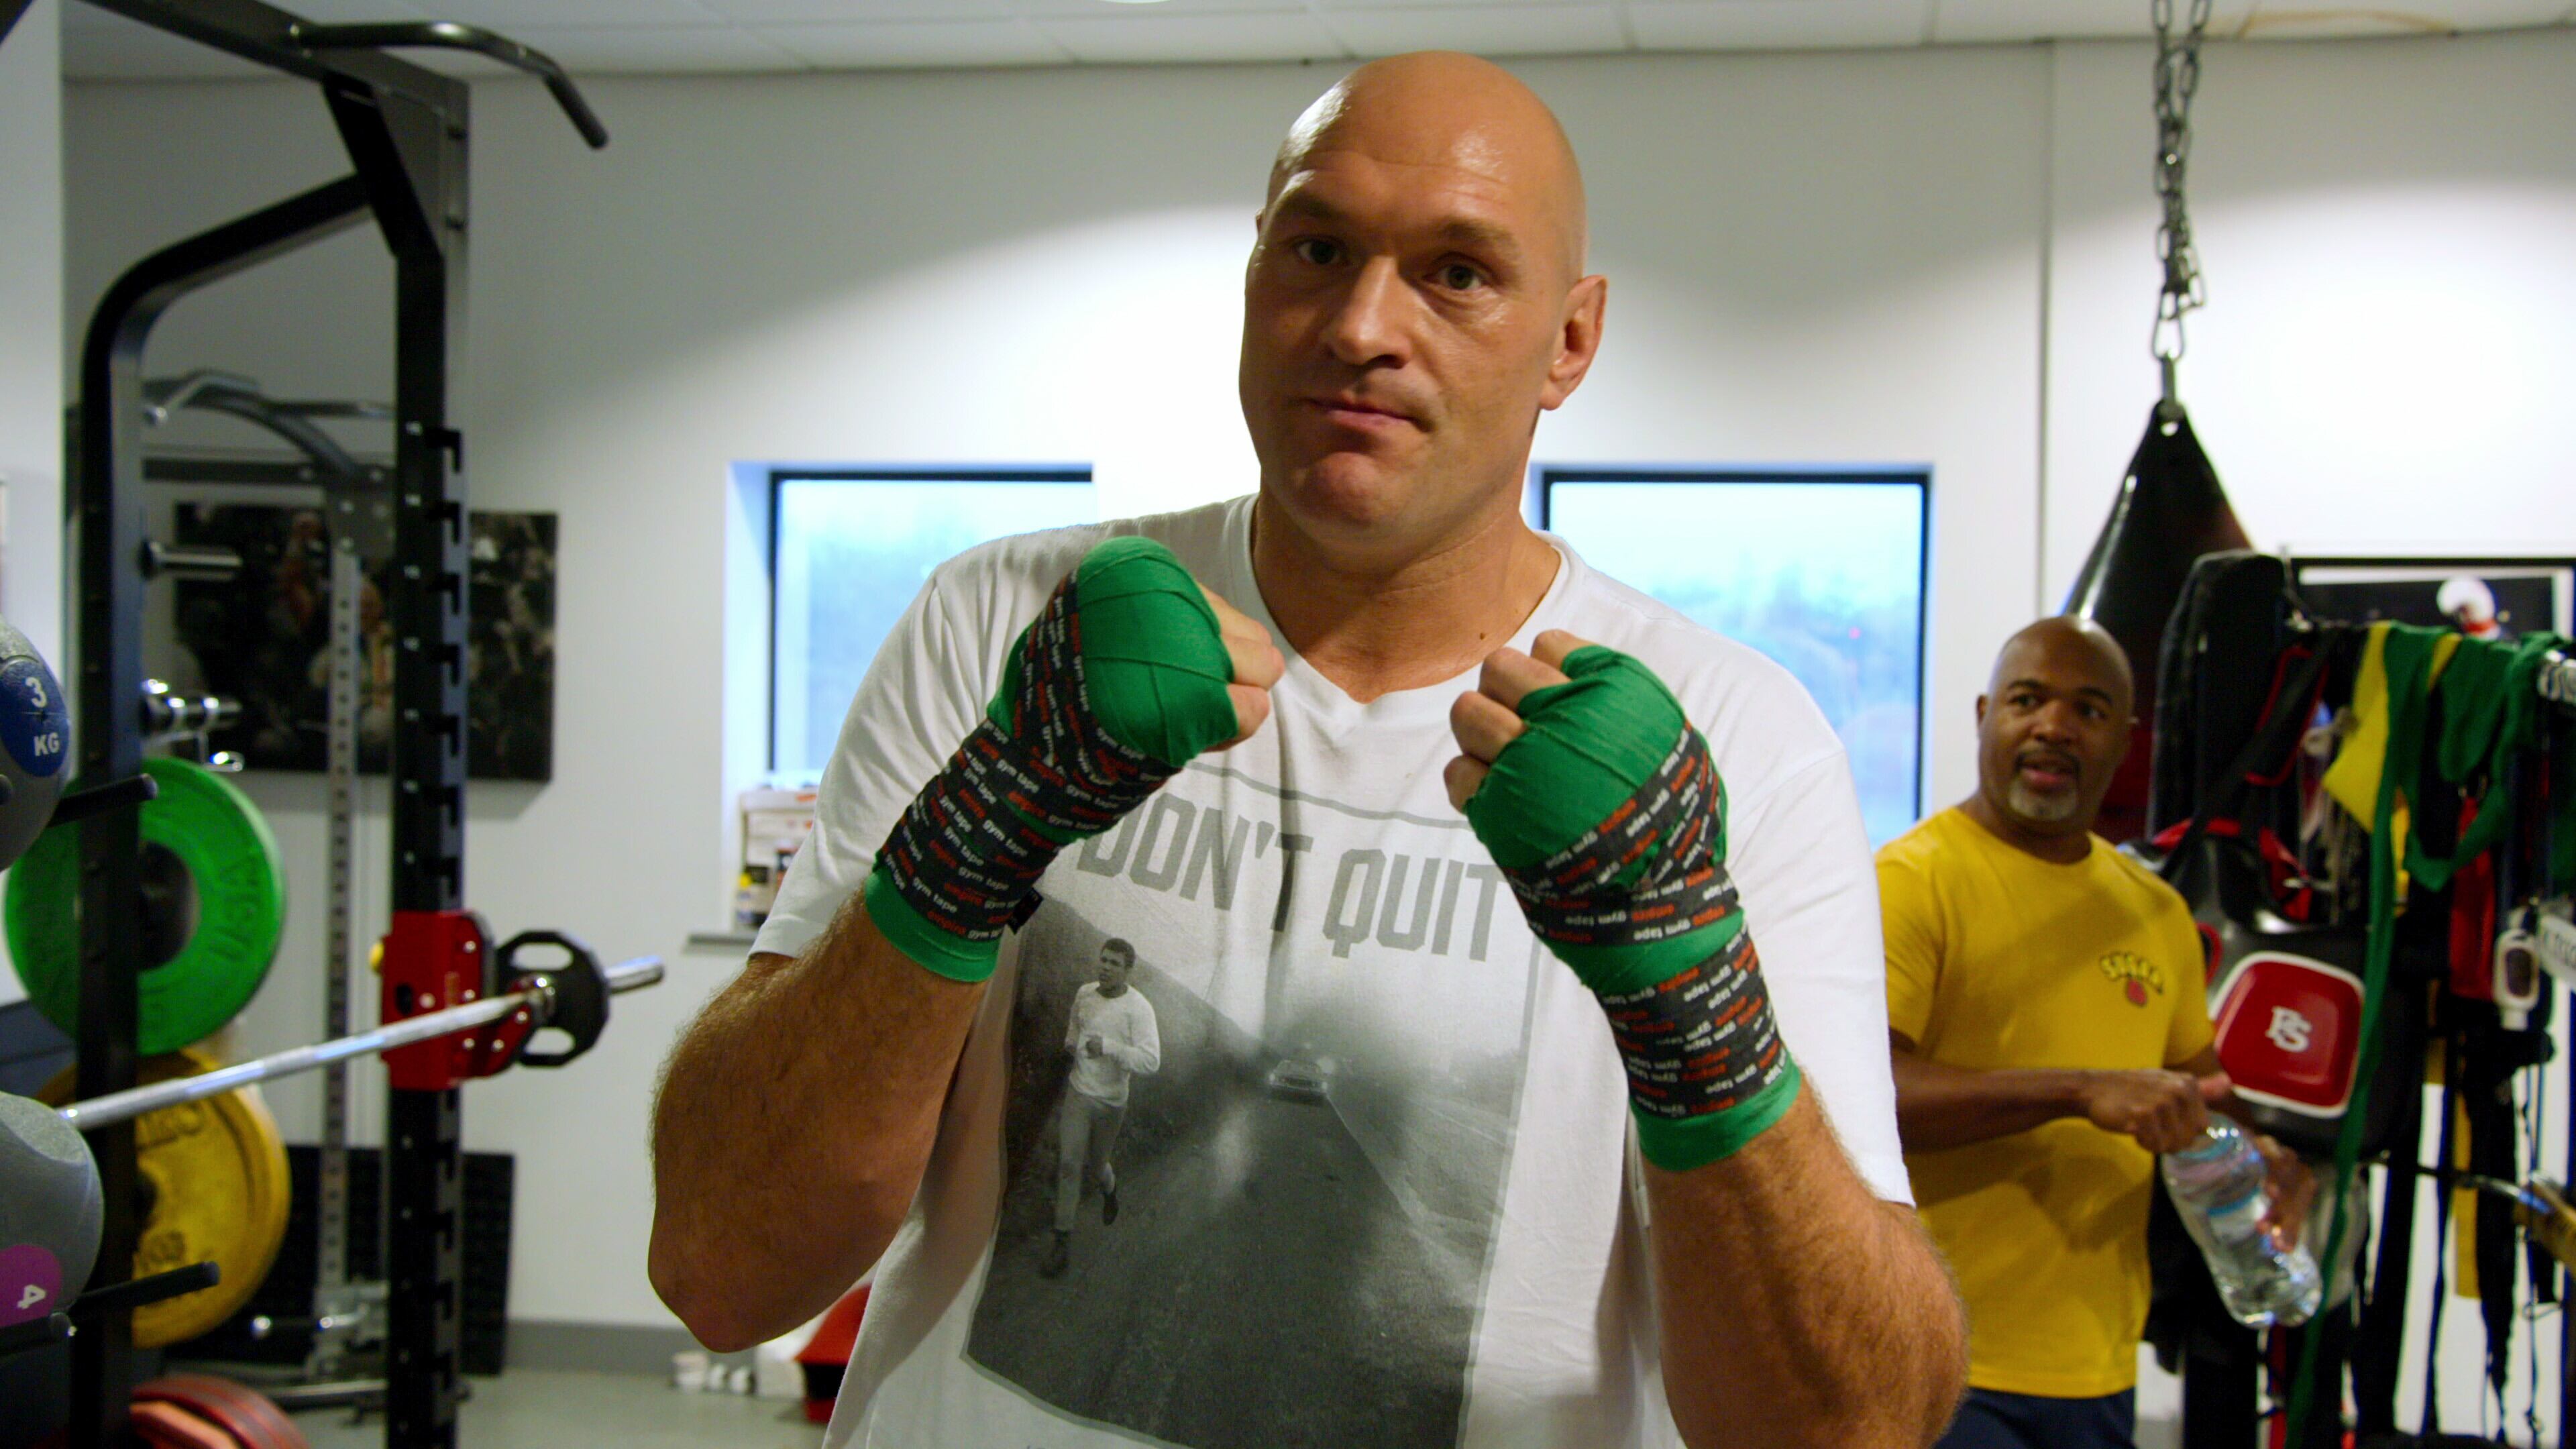 Undated Handout Photo from At Home With The Furys. Pictured: Tyson Fury. See PA Feature SHOWBIZ TV Furys. WARNING: This picture must only be used to accompany PA Feature SHOWBIZ TV Furys.